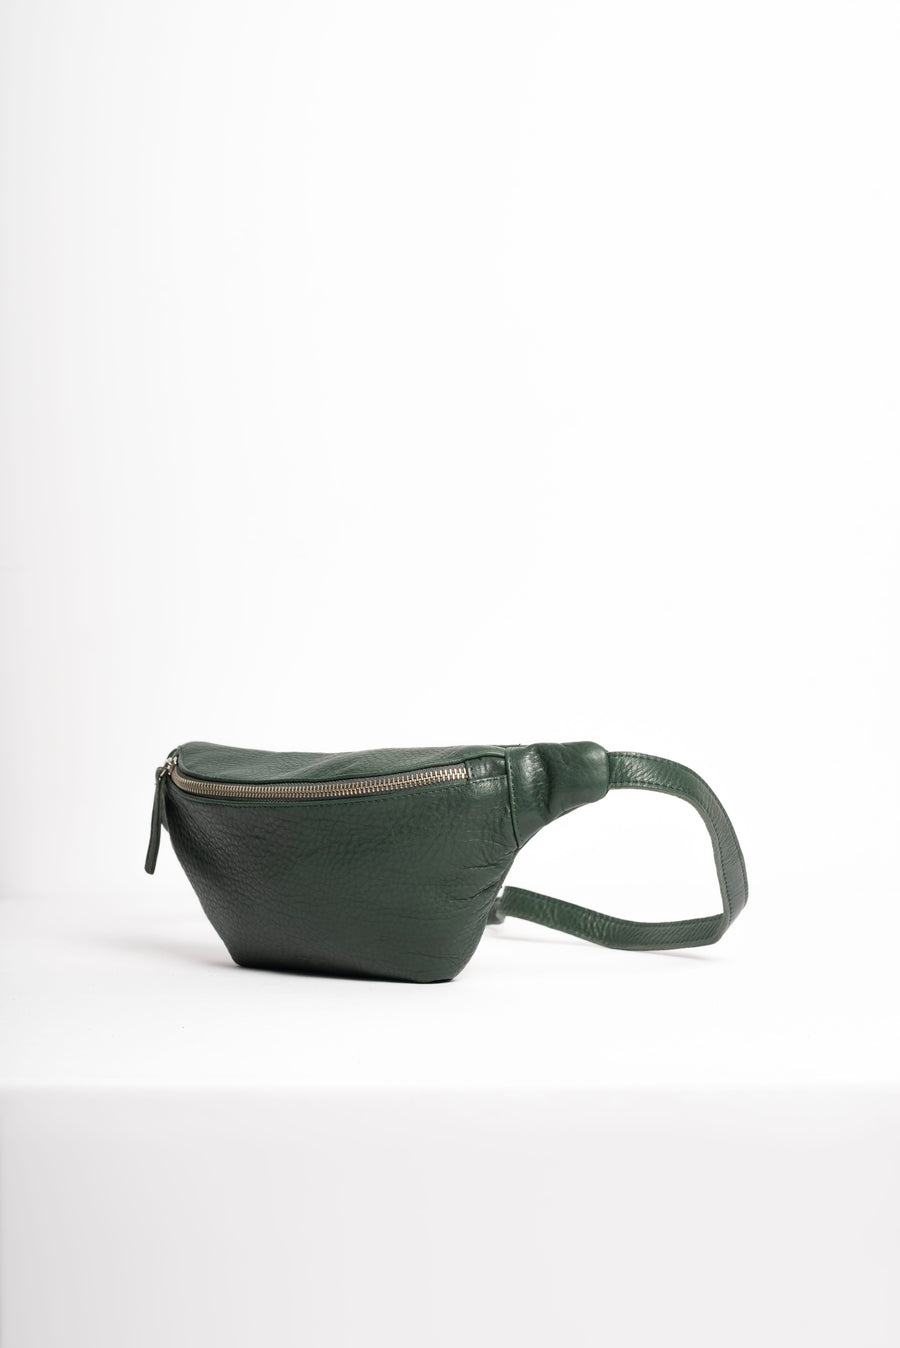 Leather fanny pack. Full grain leather belt bag. Green vegetable tanned leather. 